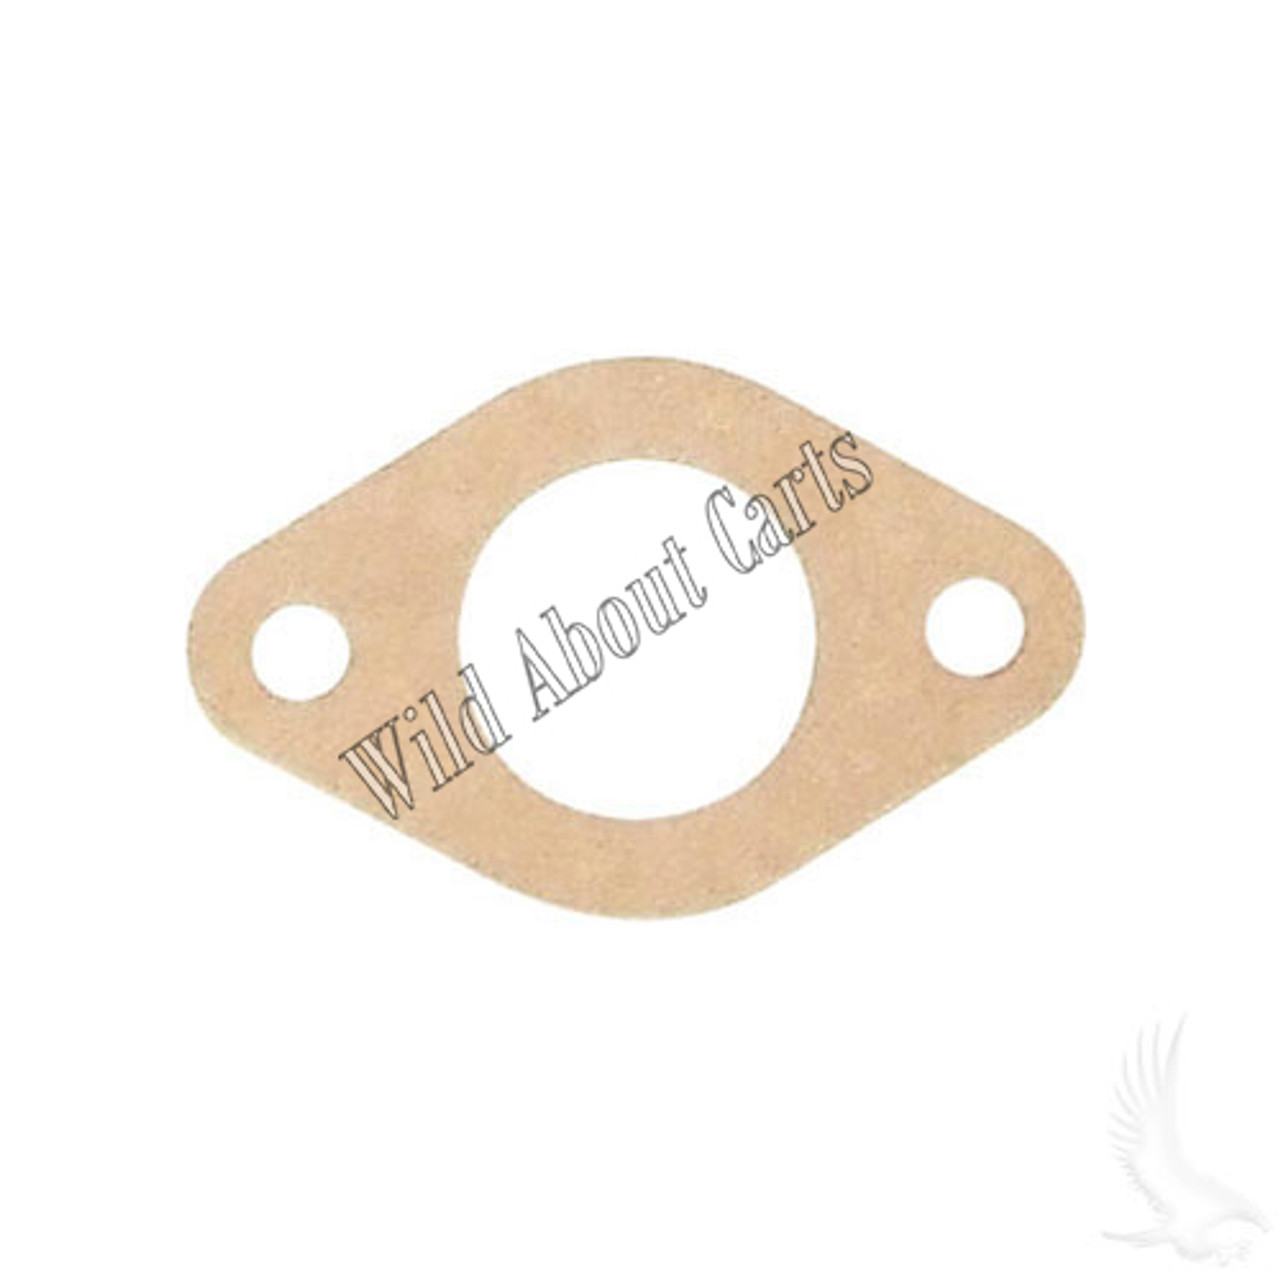 Gasket,Both Sides of Insulator, E-Z-Go 4 Cycle, CARB-034